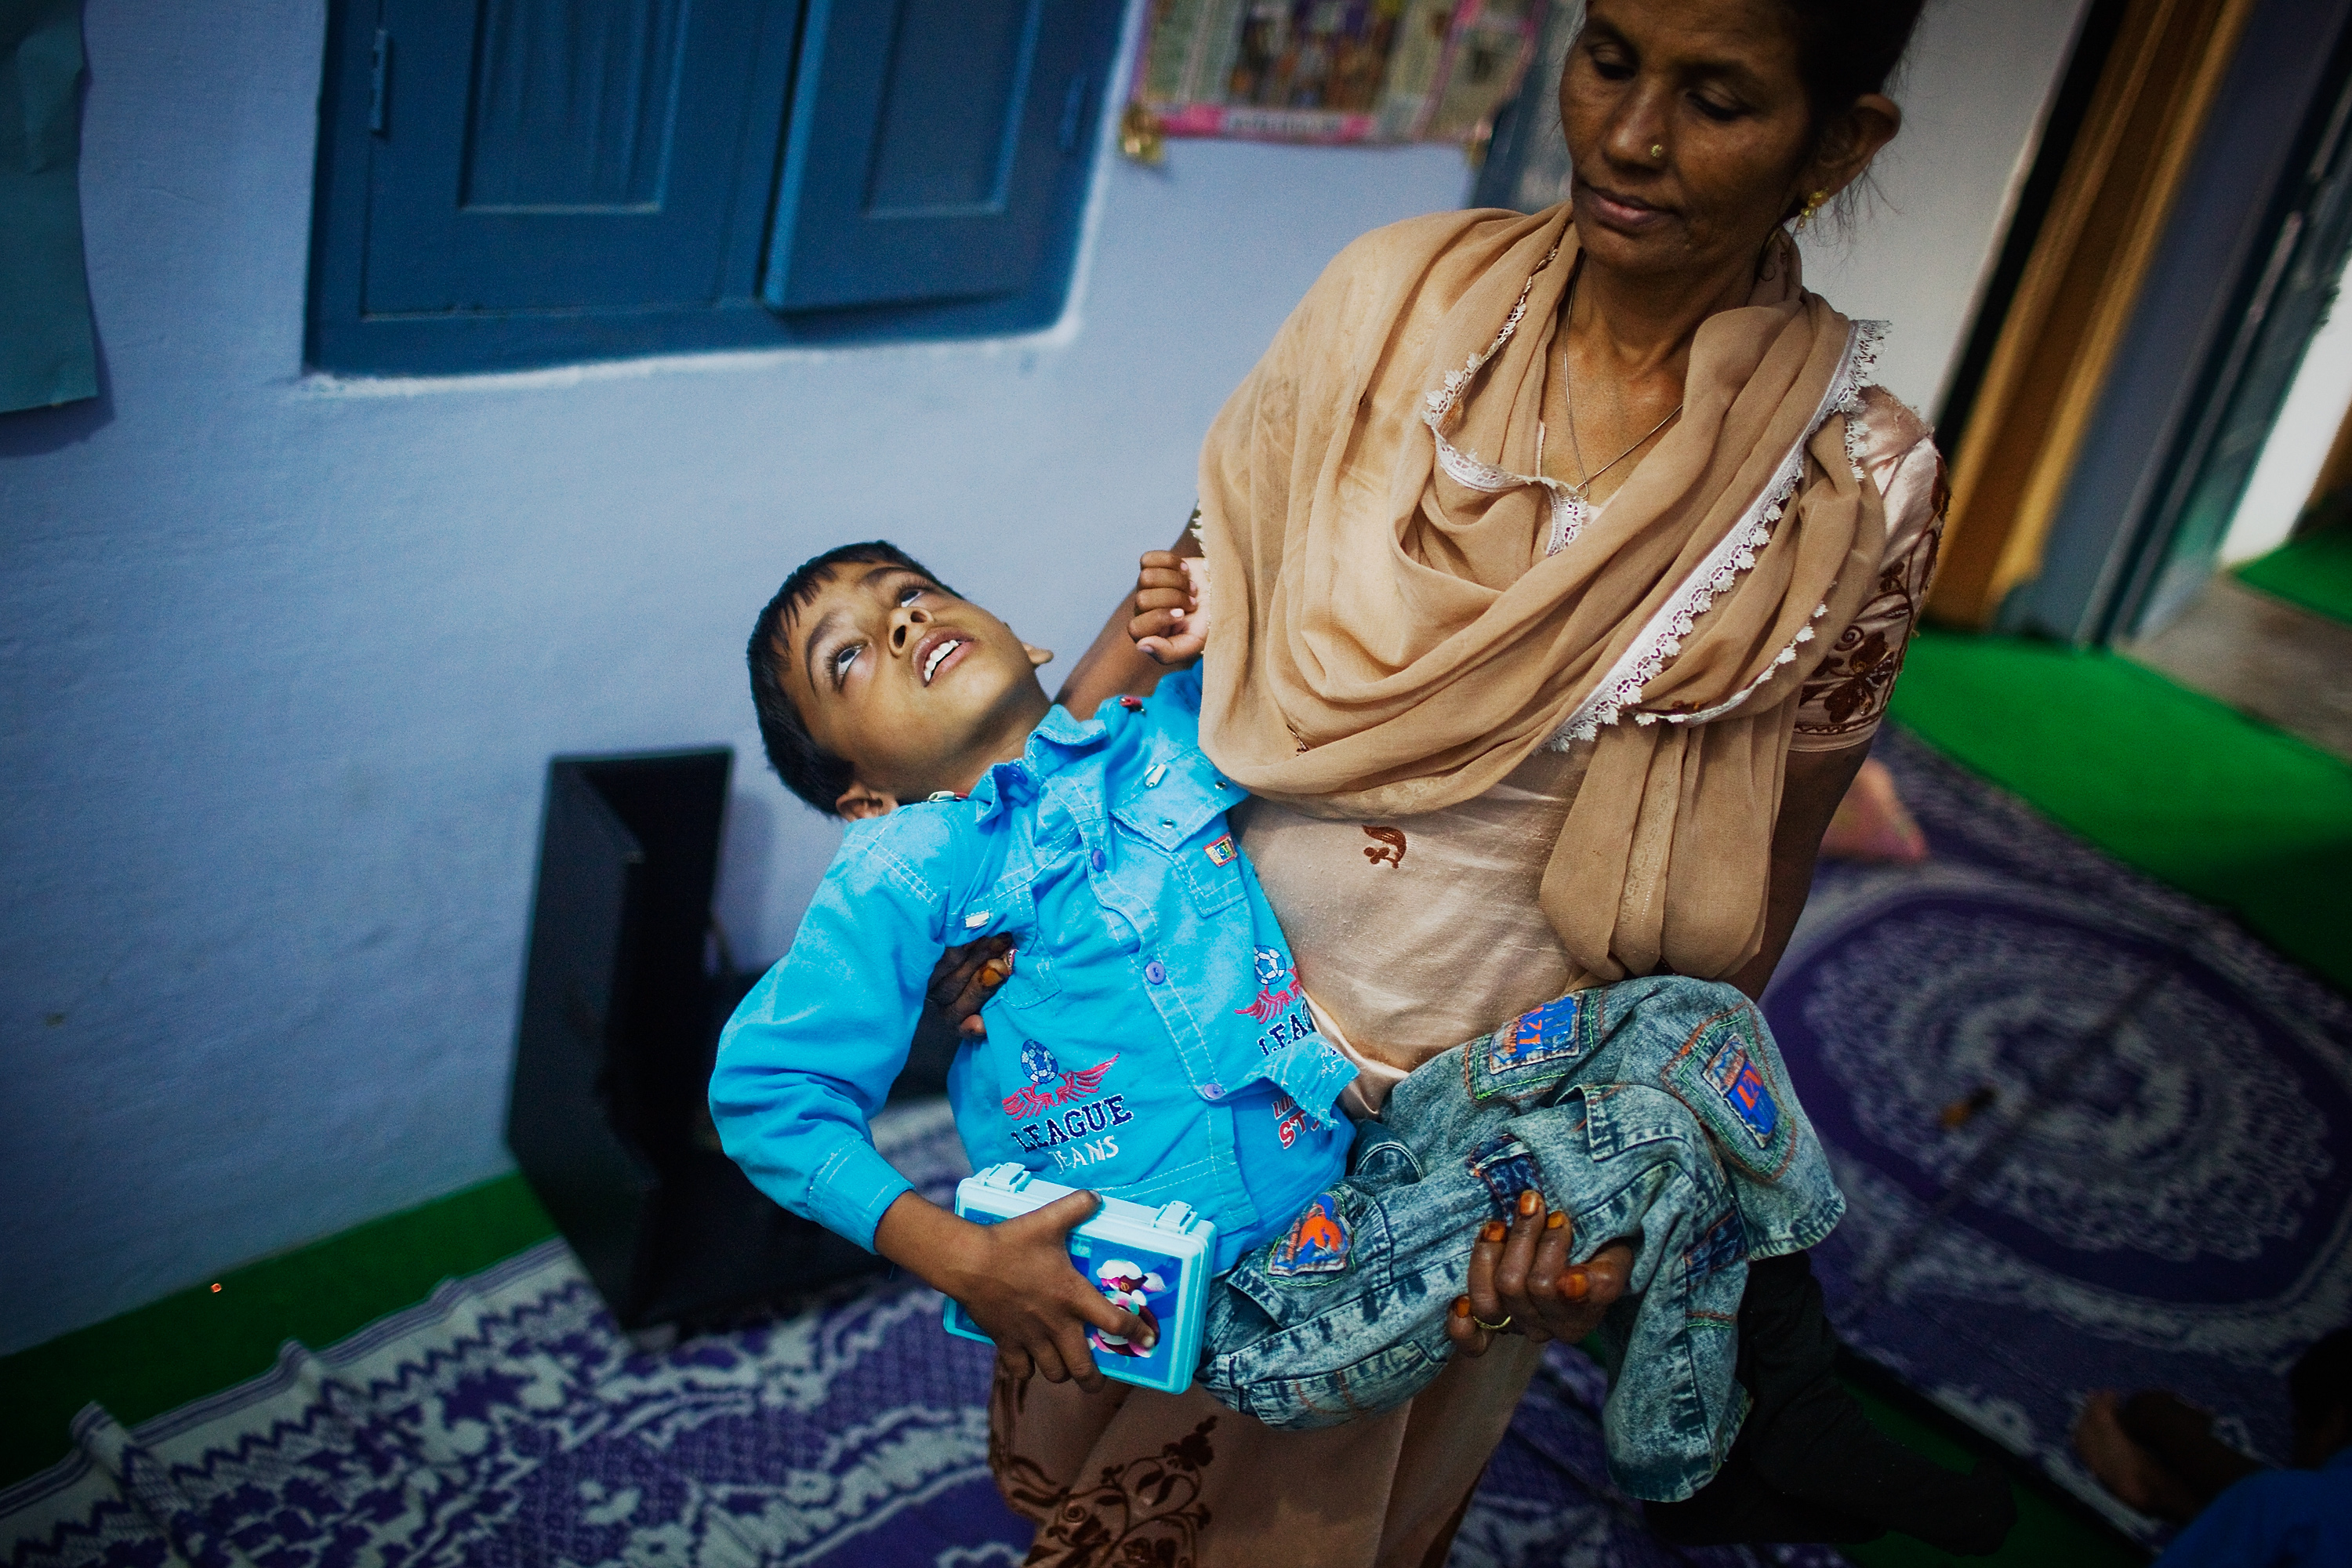 Years after the Union Carbide factory disaster in Bhopal a new generation is growing up sick, disabled and struggling for justice. Daniel Berehulak/Getty Images